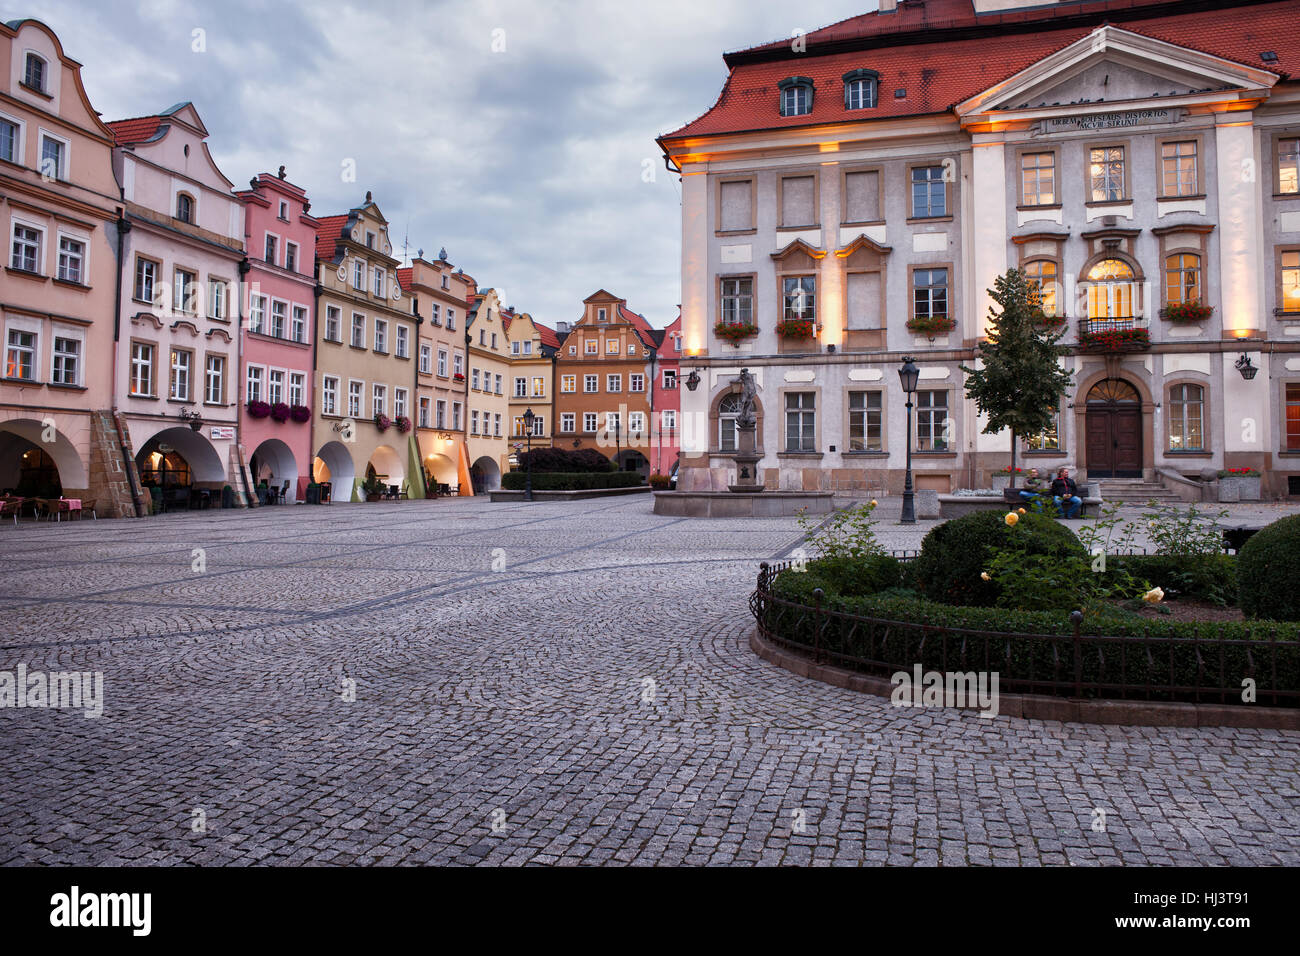 City of Jelenia Gora in Poland, Europe, Old Town Market Square with gabled houses and City Hall Stock Photo